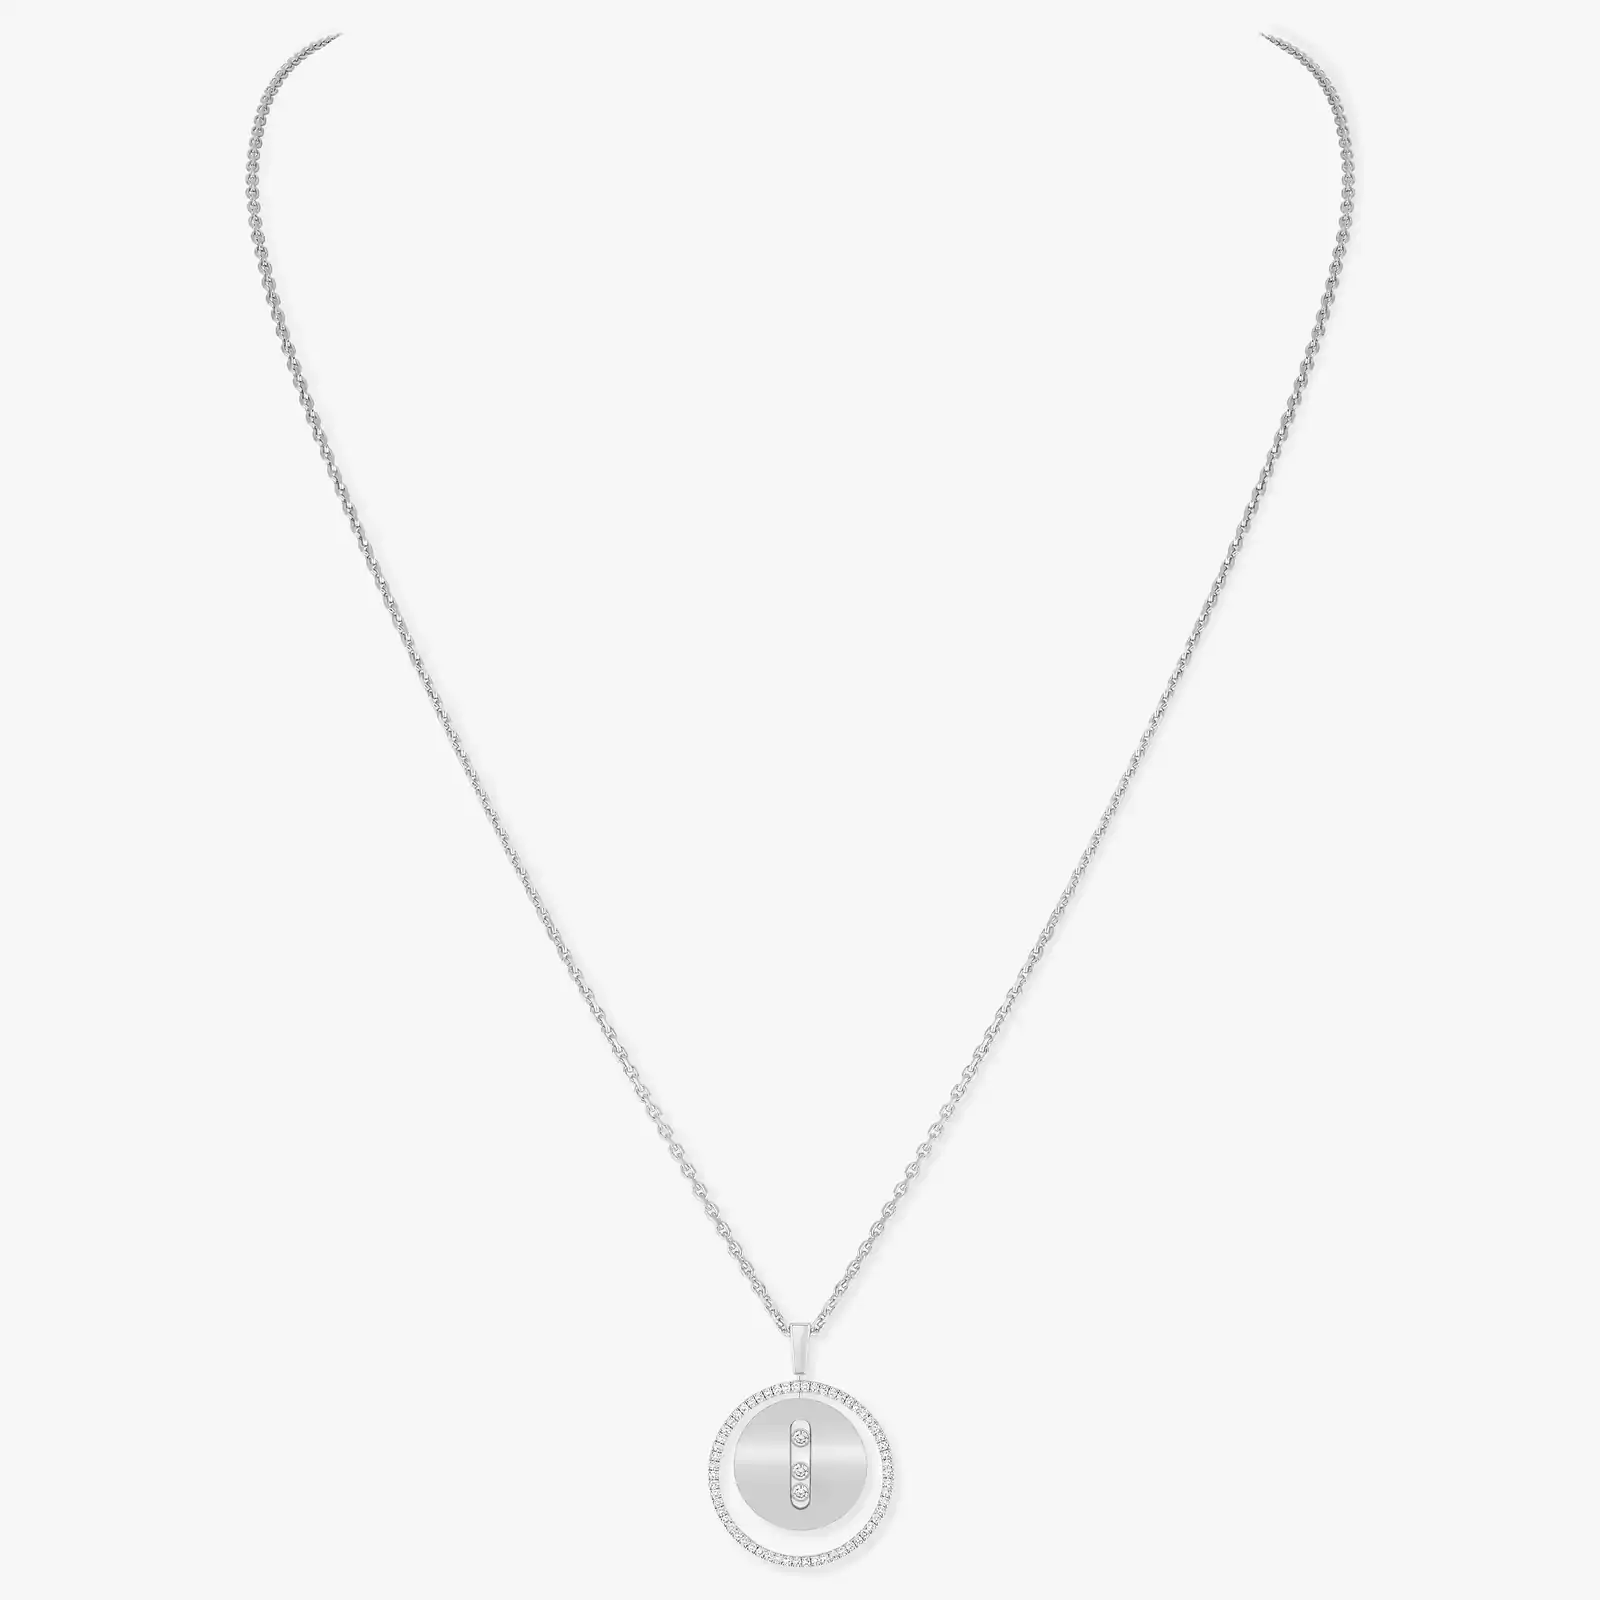 Collier Femme Or Blanc Diamant Lucky Move MM 07394-WG